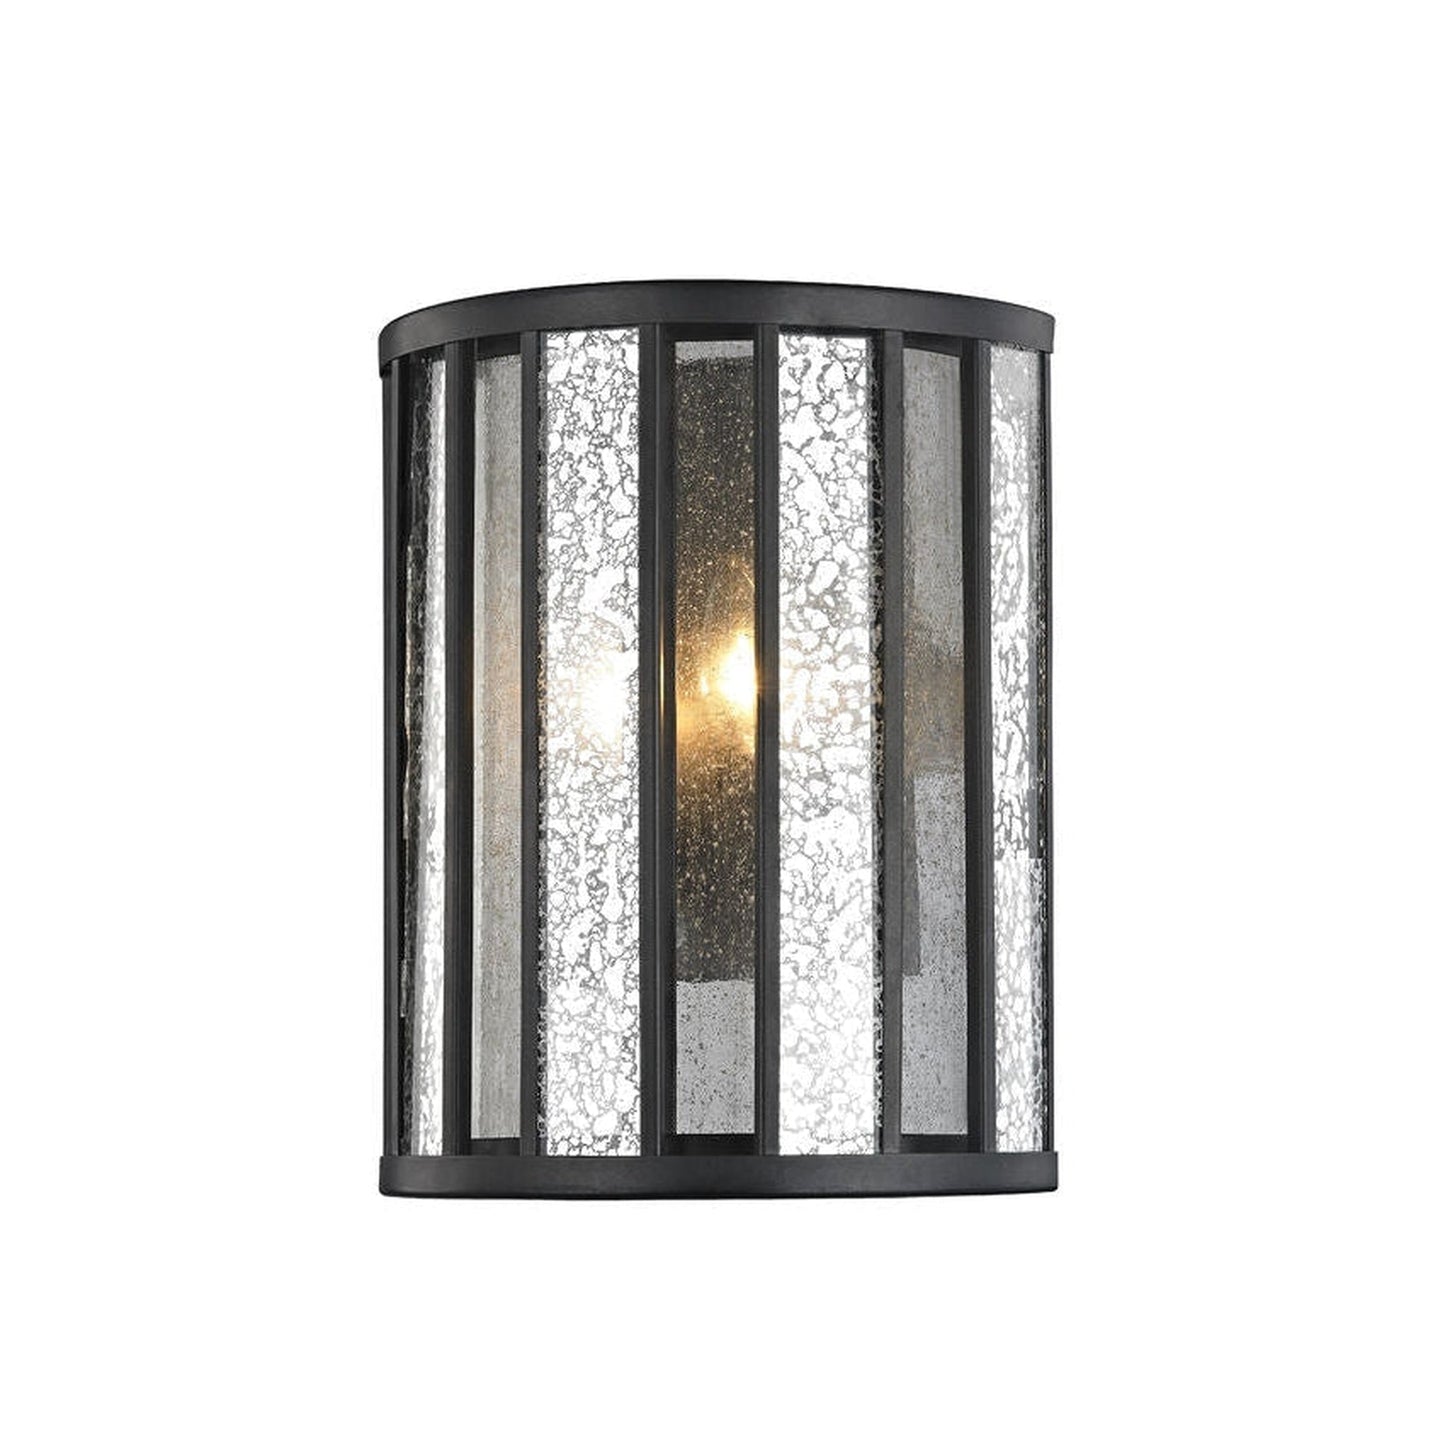 Z-Lite Juturna 4" 2-Light Bronze Wall Sconce With Silver Mercury and Clear Seedy Glass Shade